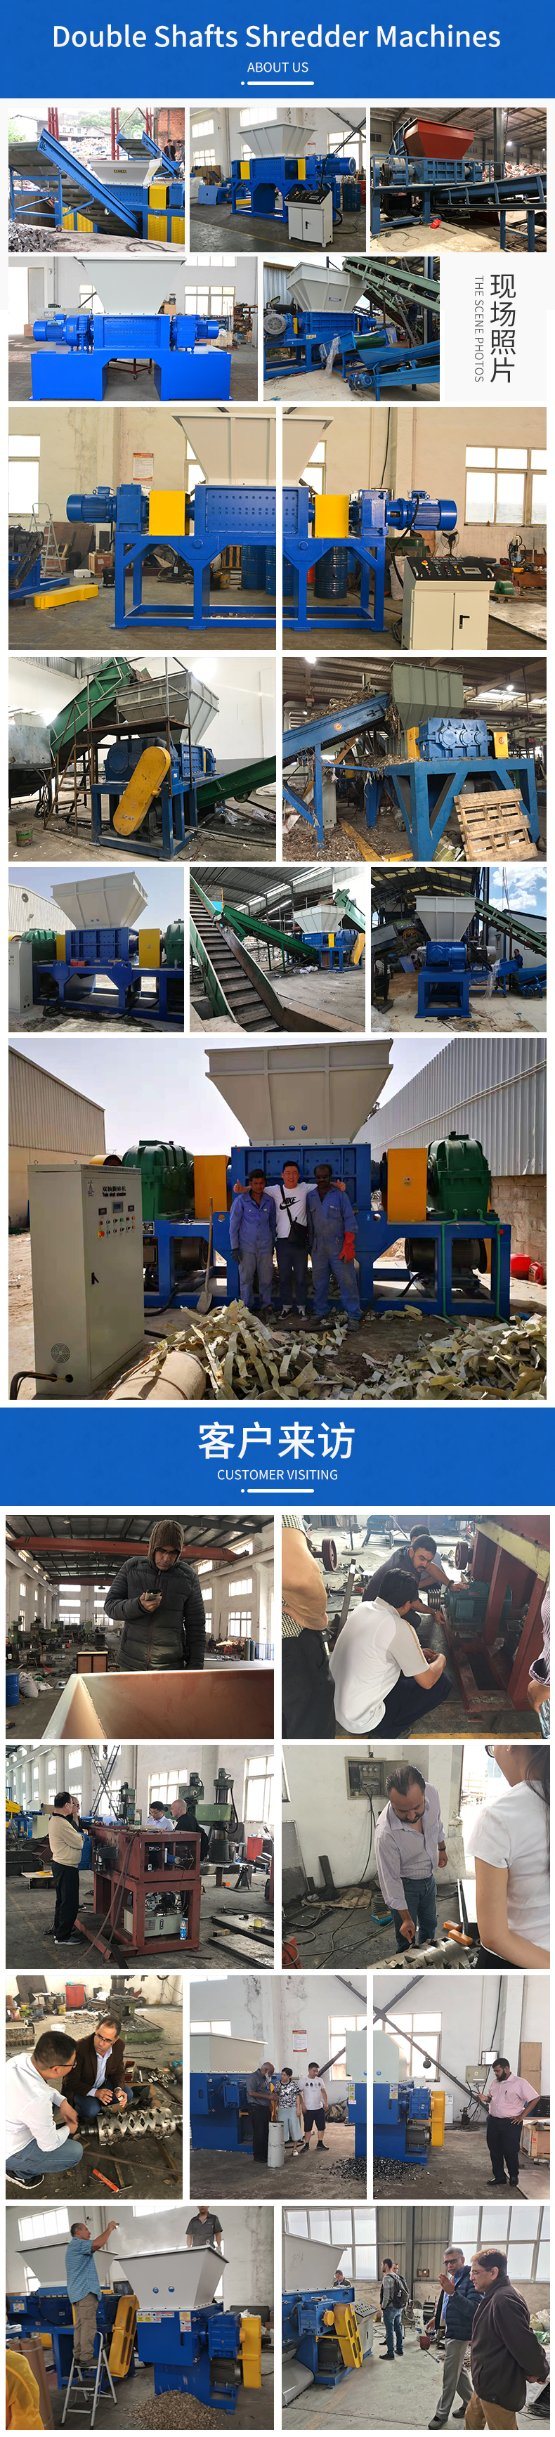 HDPE Crusher/Plastic Crusher/Waste Plastic Cruhser/PE/PP Profile Crusher/Waste Injection Plastic Crusher/PVC Crusher/Heavey Duty Crusher/Crusher for Plastic